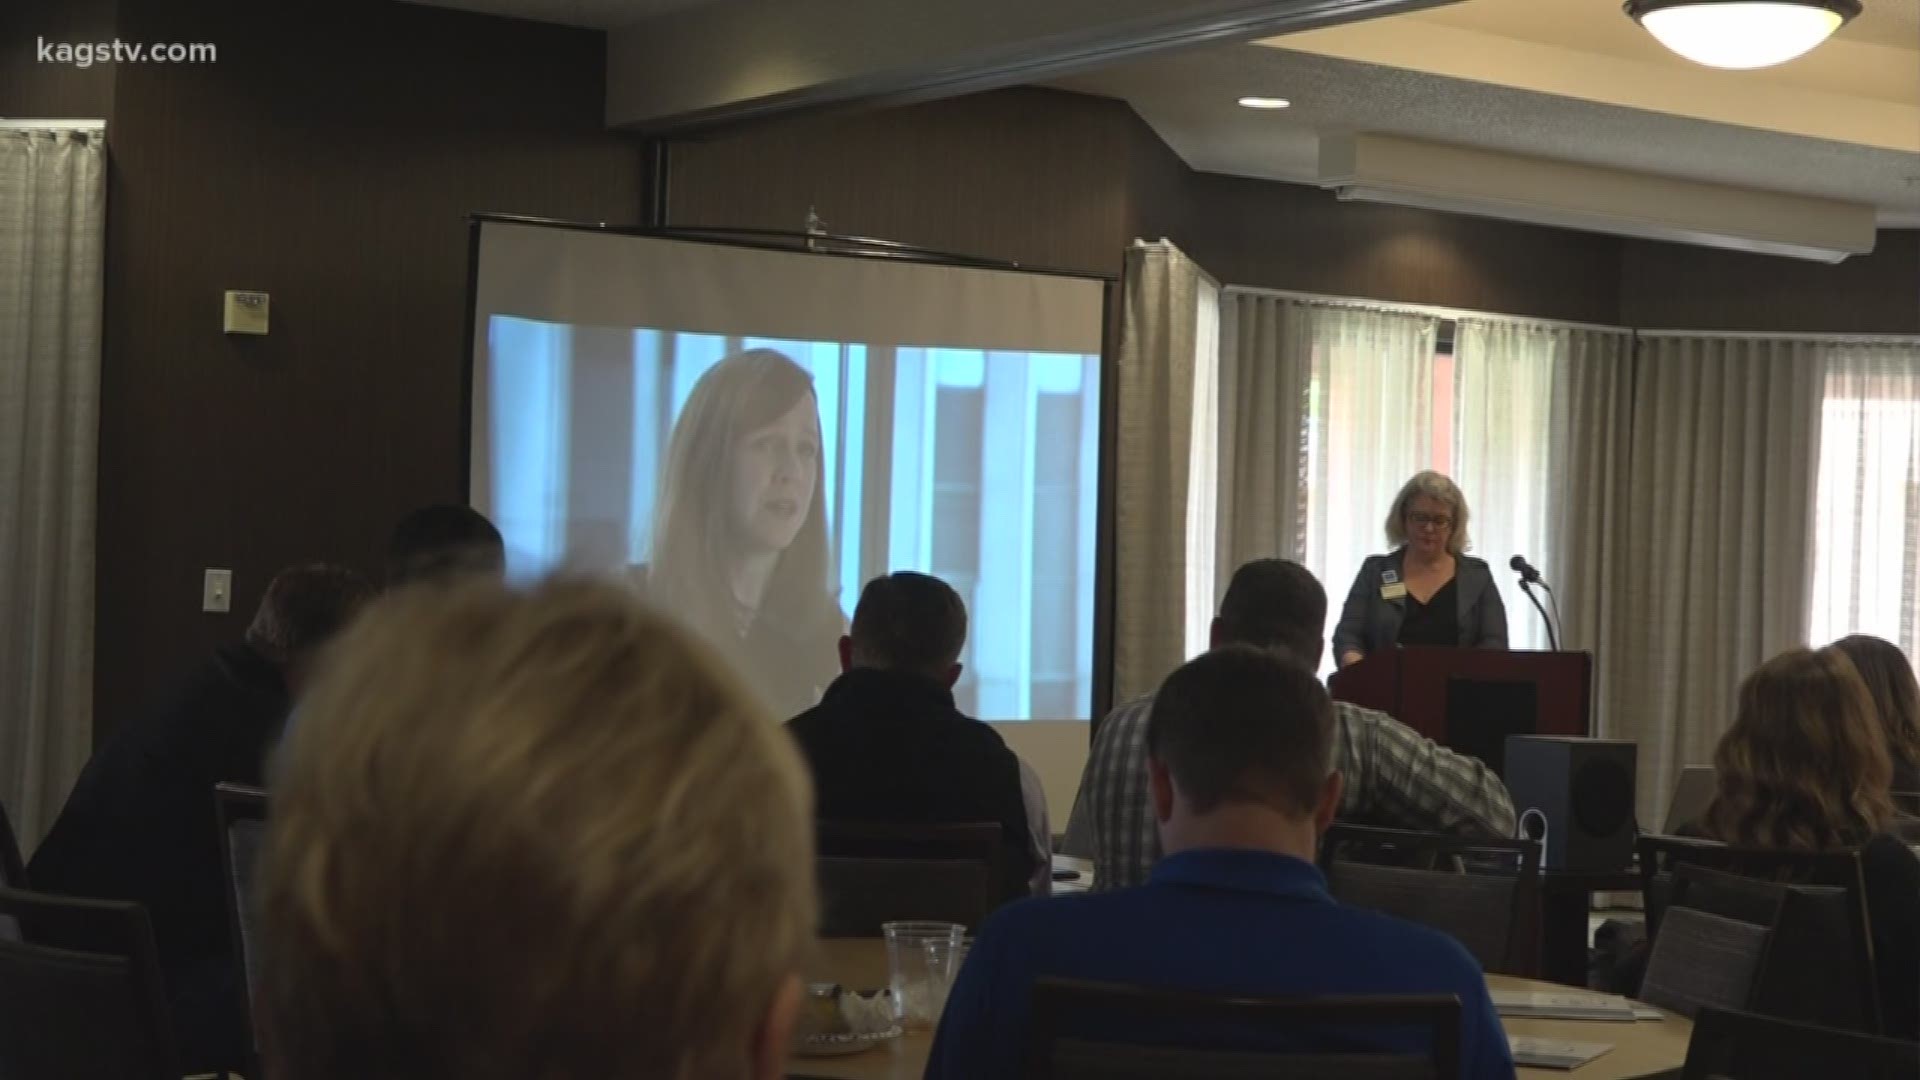 Local Hotel Employees Participate In Sex Trafficking Prevention Training